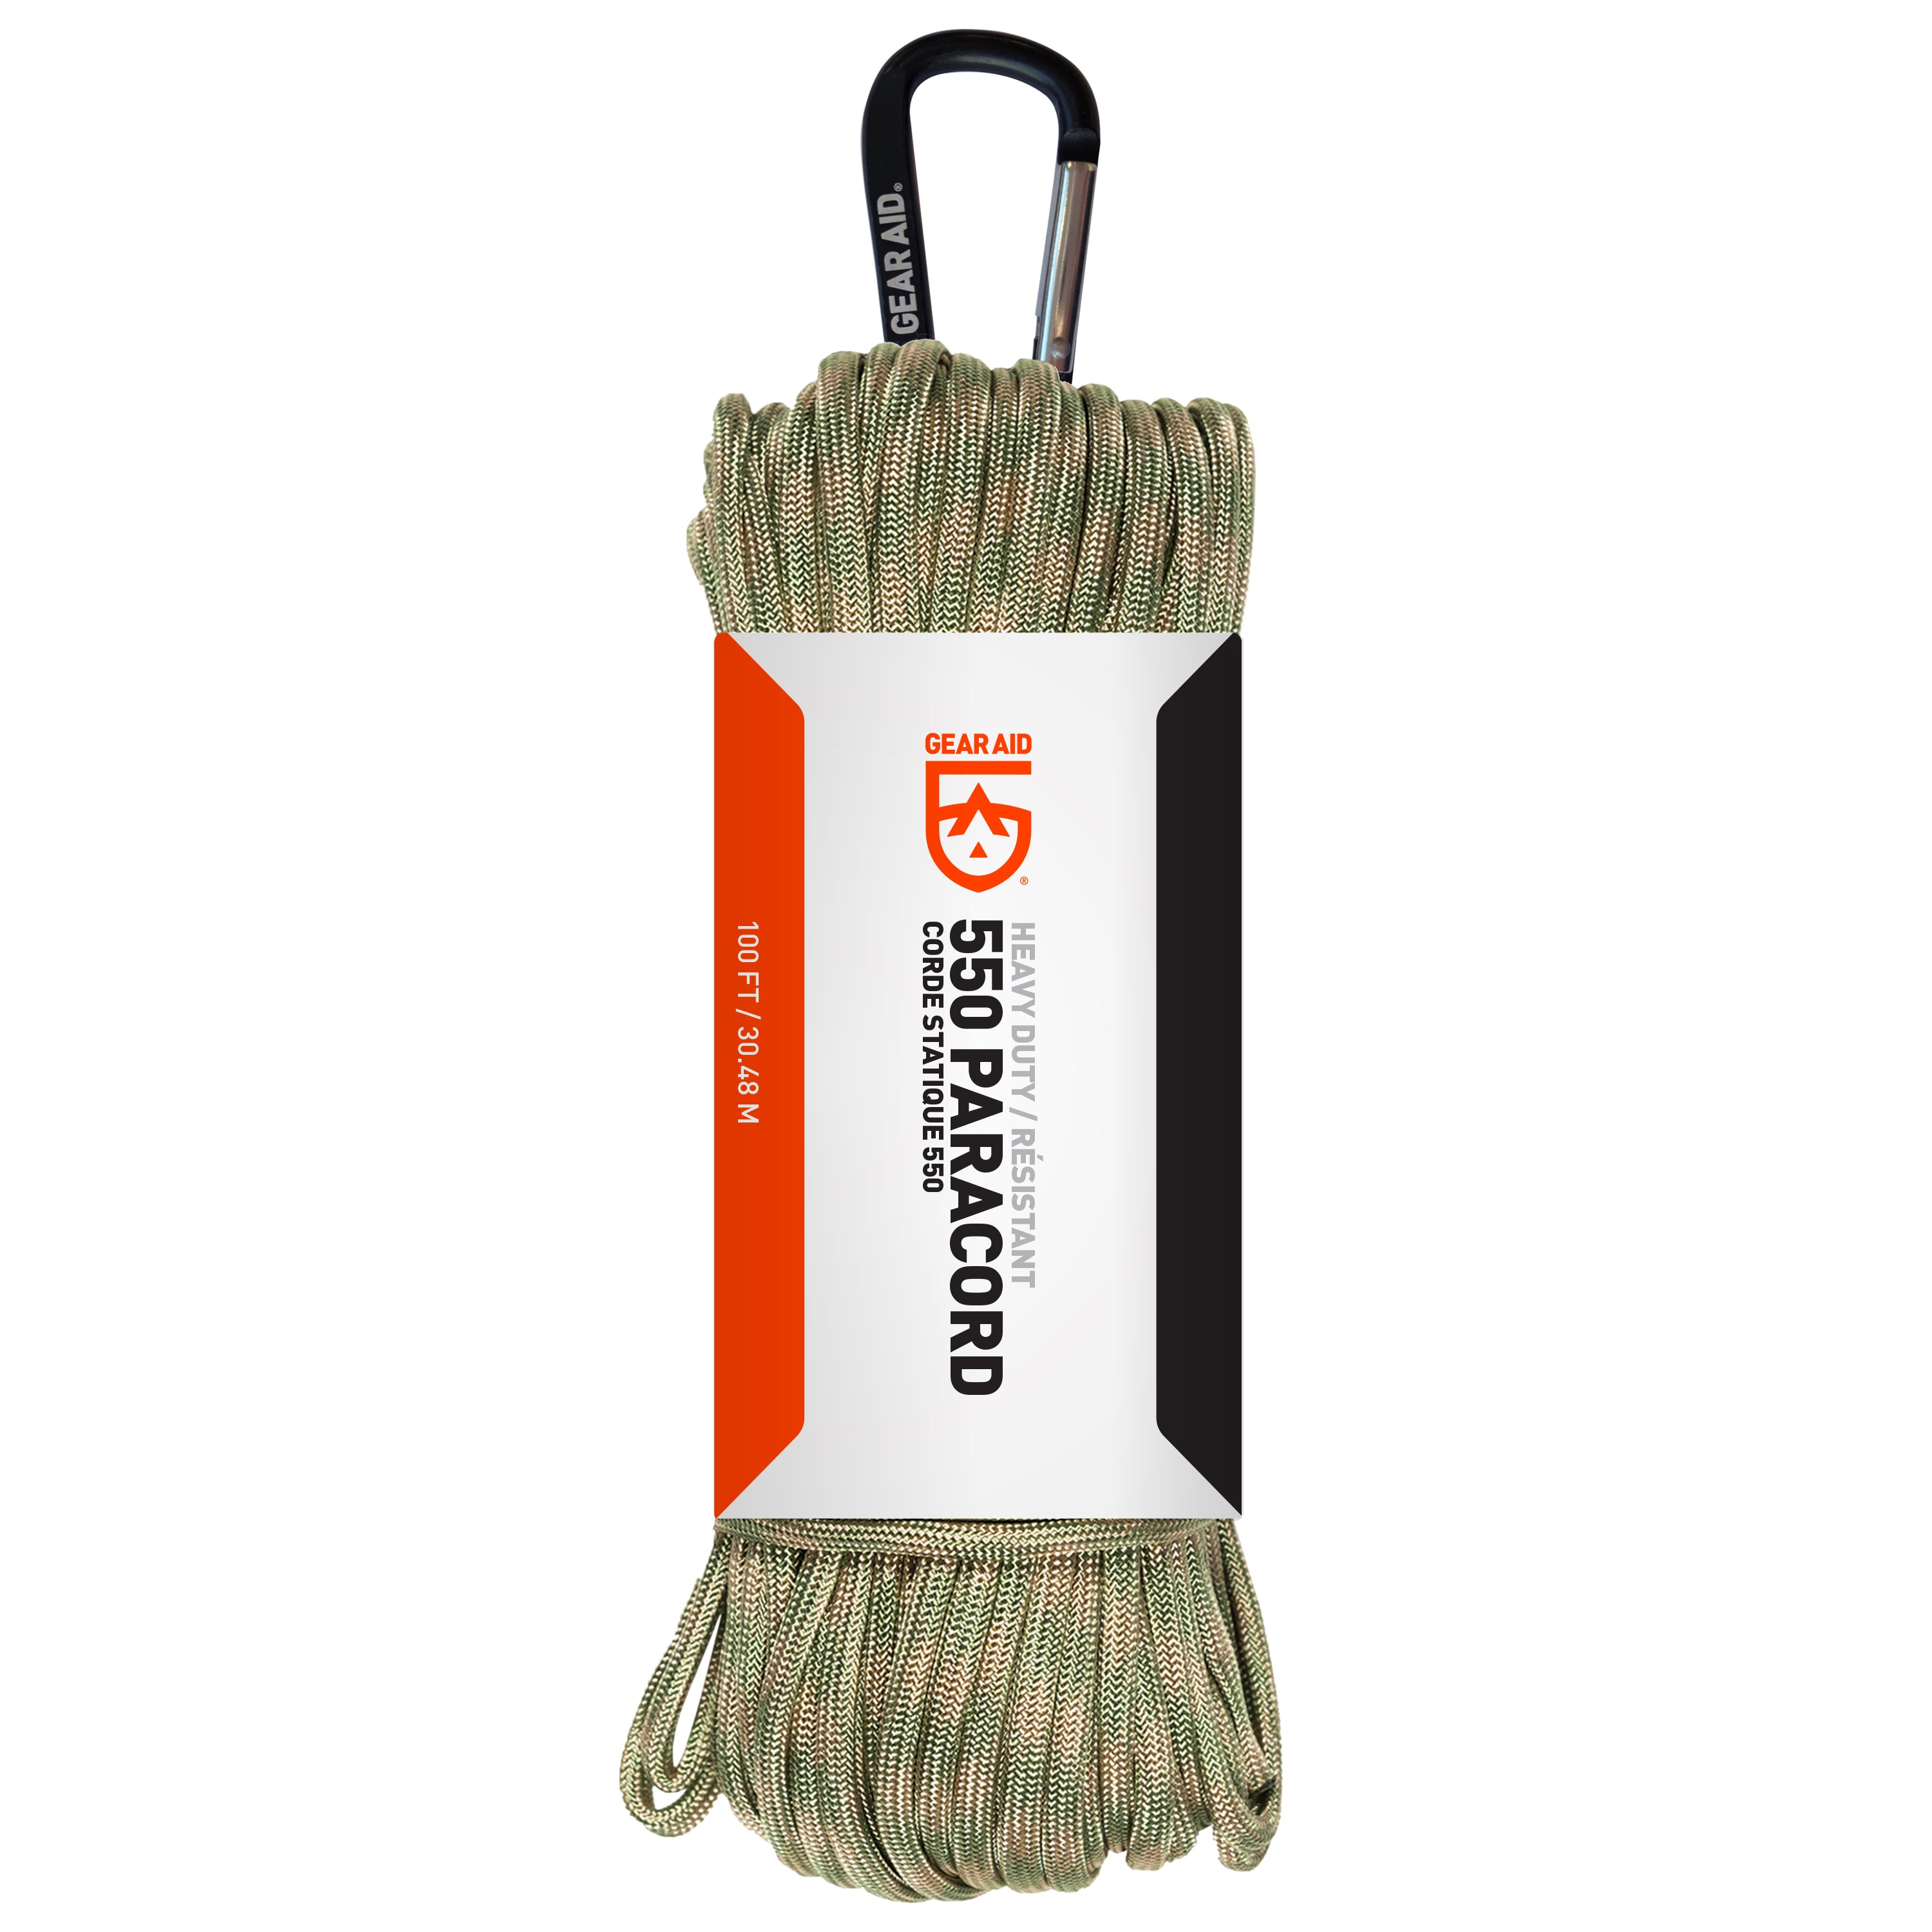 100Ft 550 Paracord Graphite - Army Navy Gear